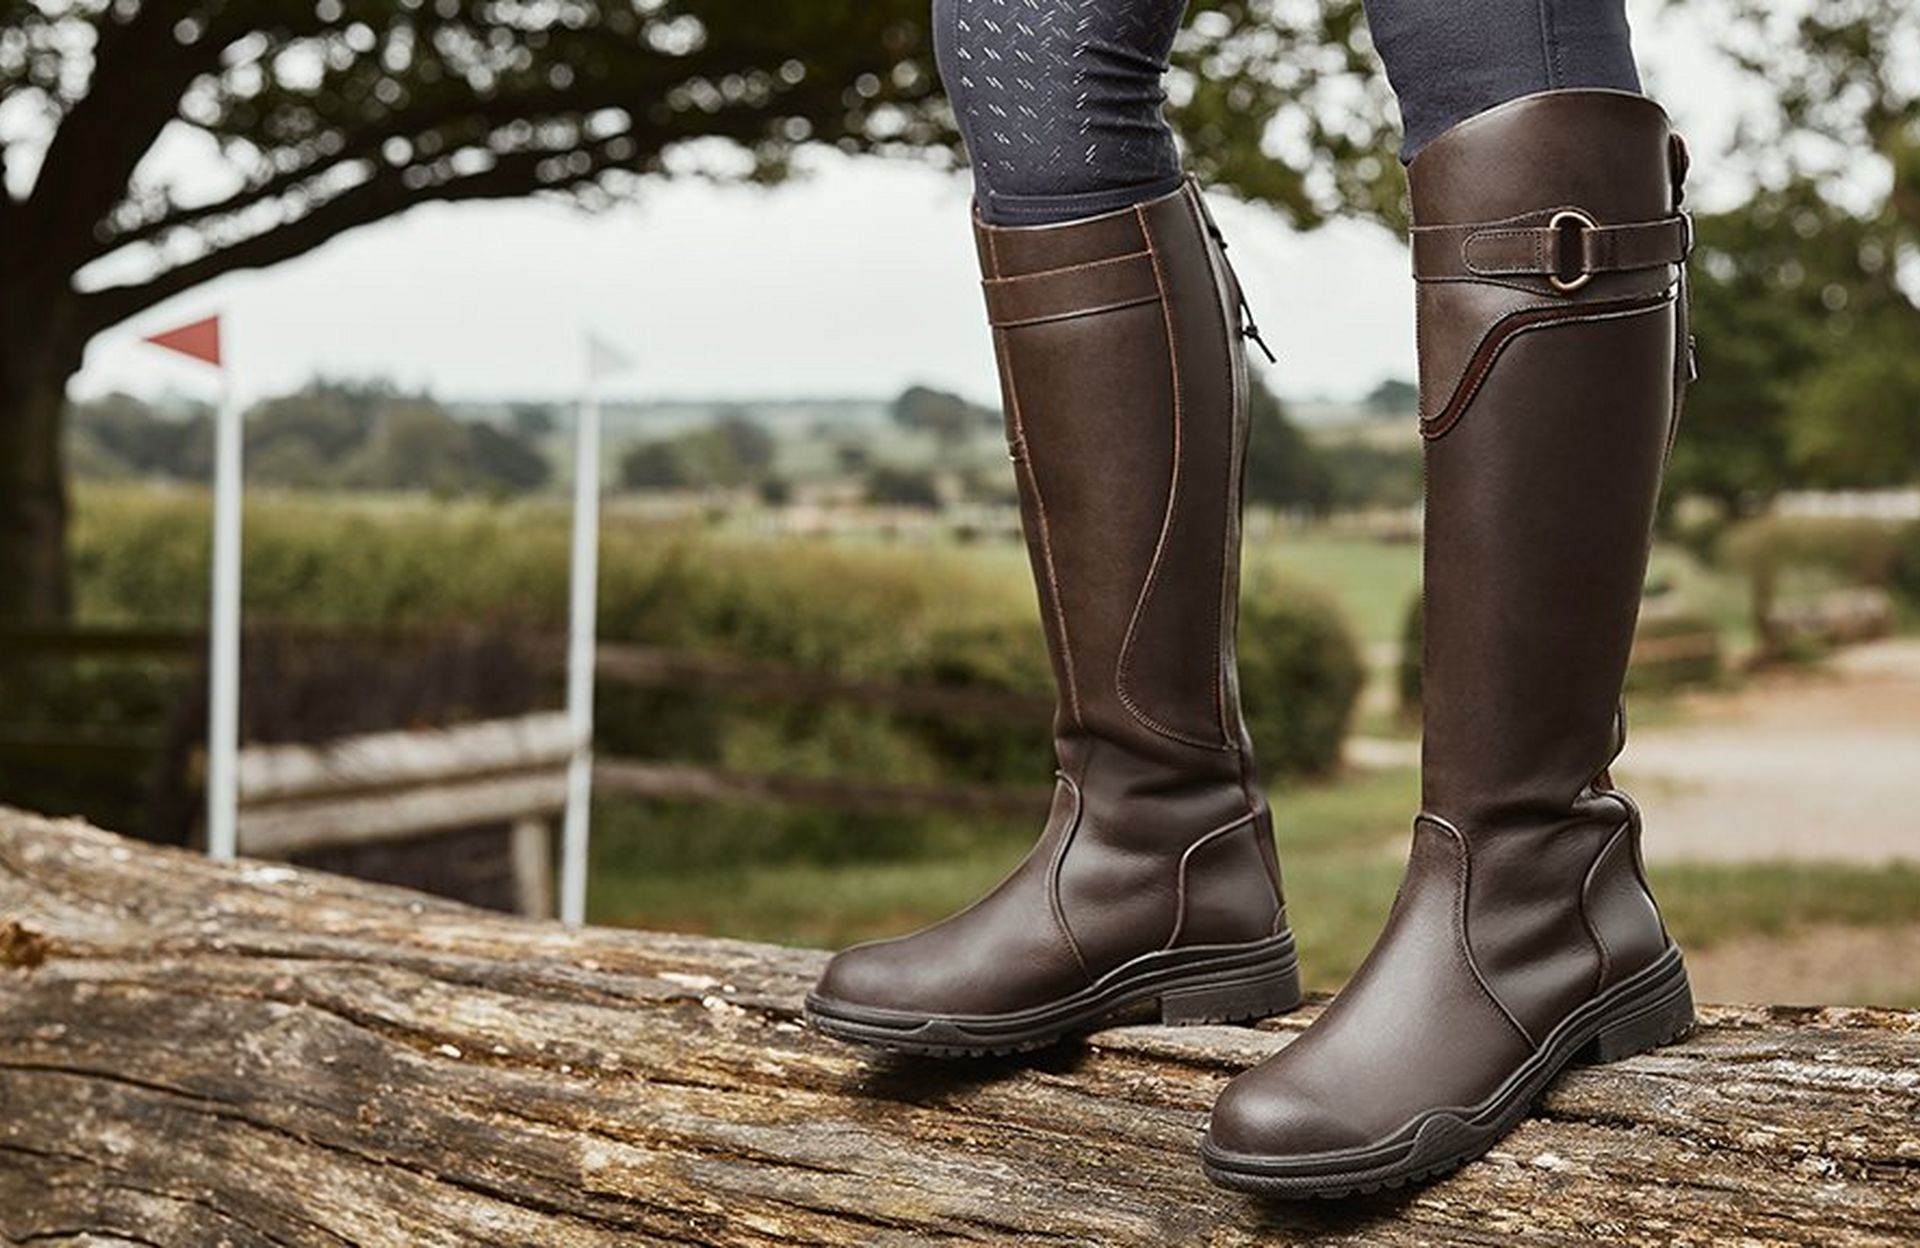 The Plus Life Blog Shares Where To Find Extra Wide Calf Boots That